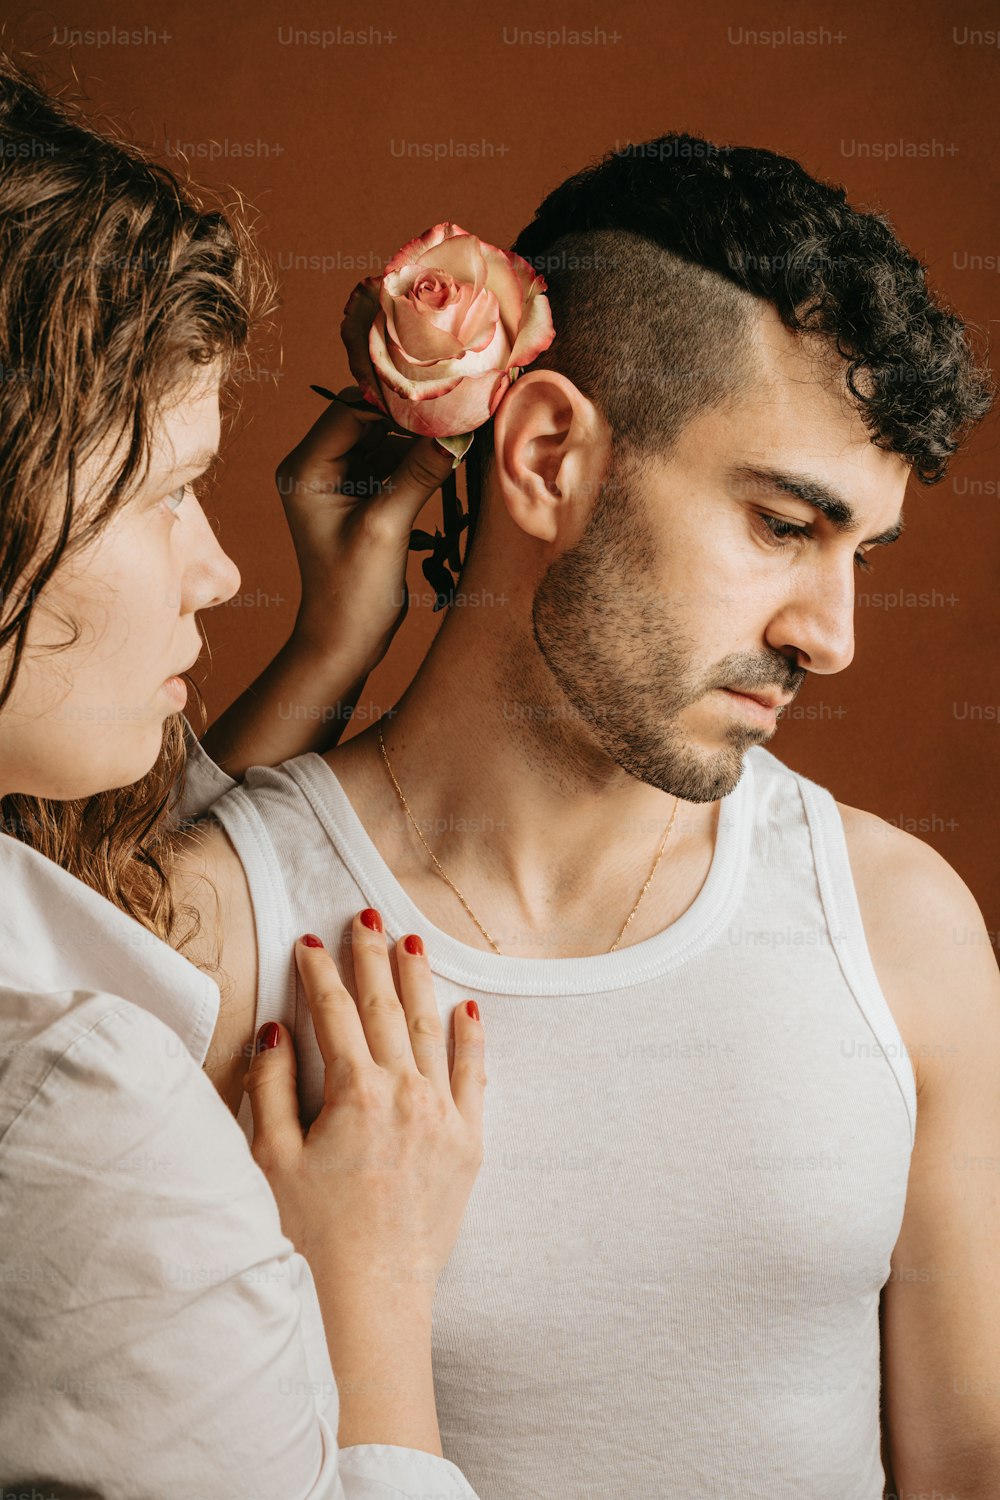 a man putting a flower on a woman's head